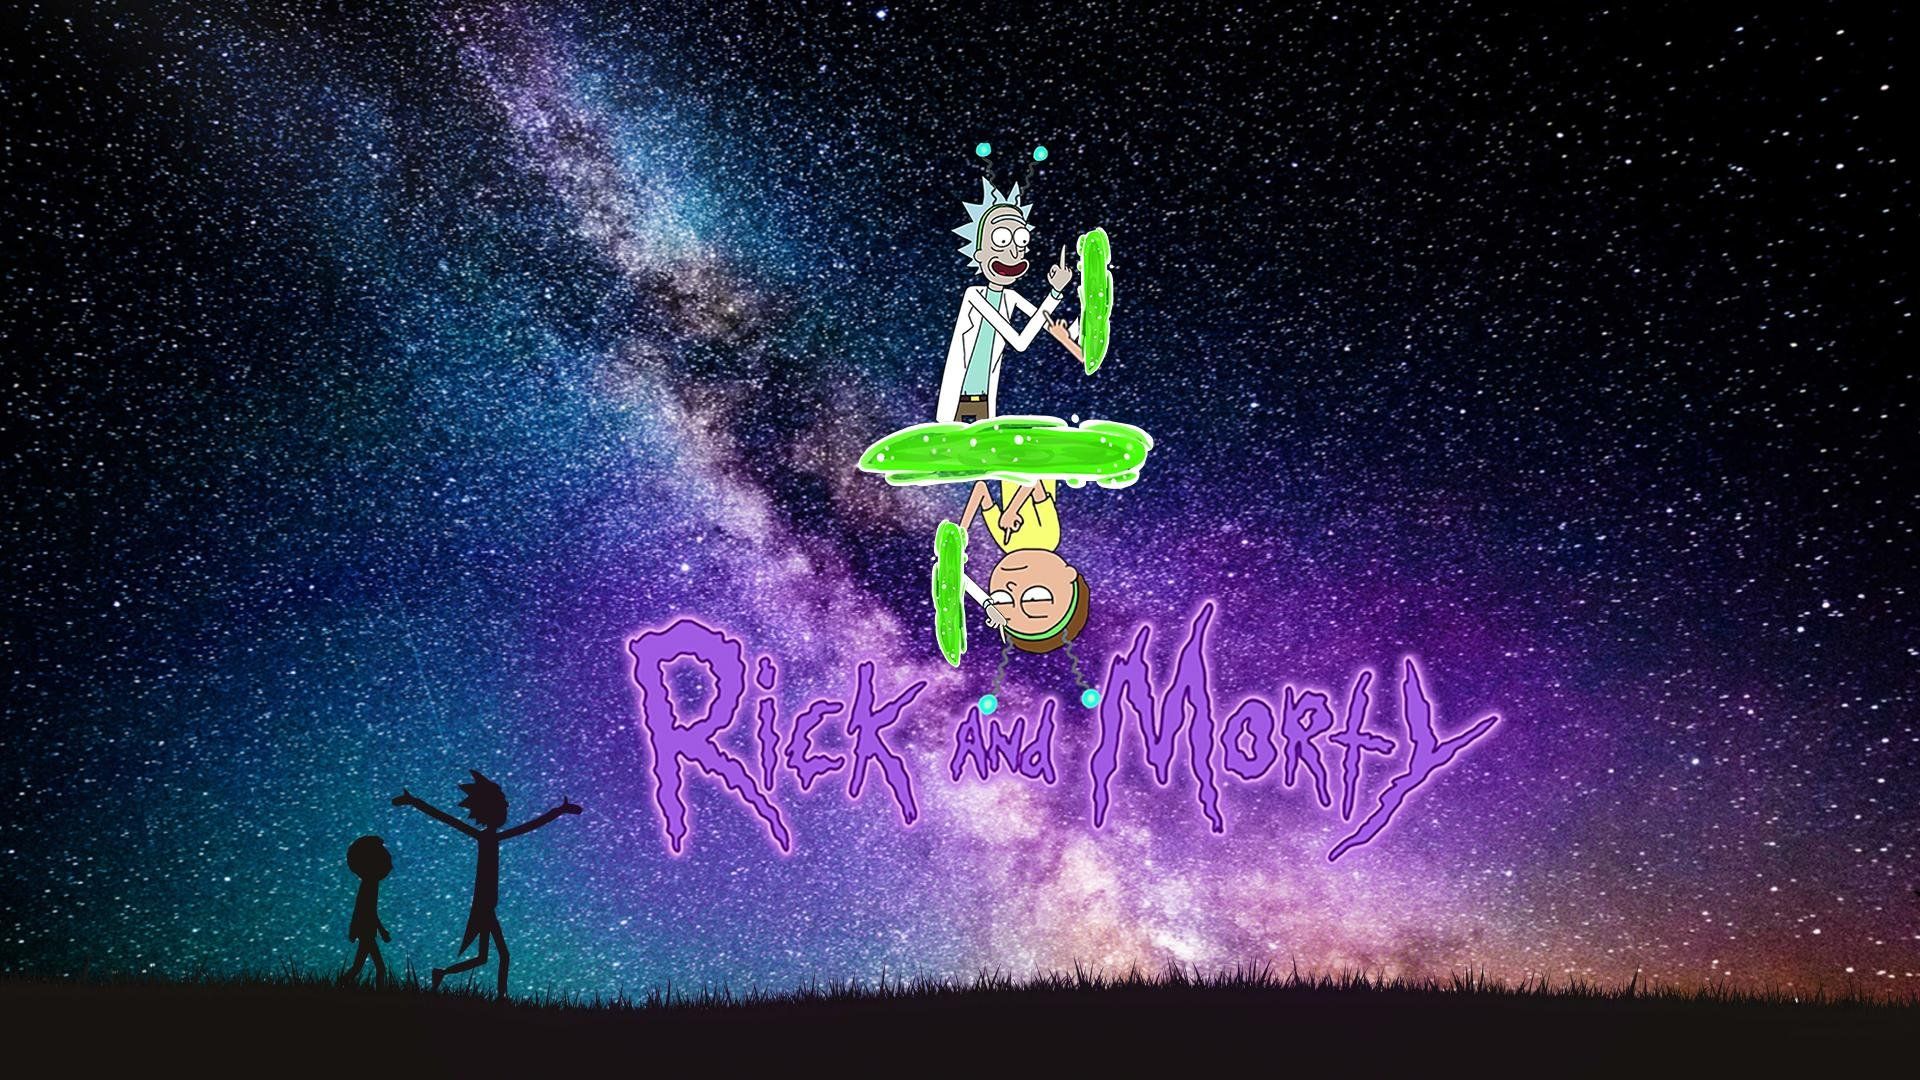 Coolest PC Minimalist Rick And Morty Wallpapers - Wallpaper Cave